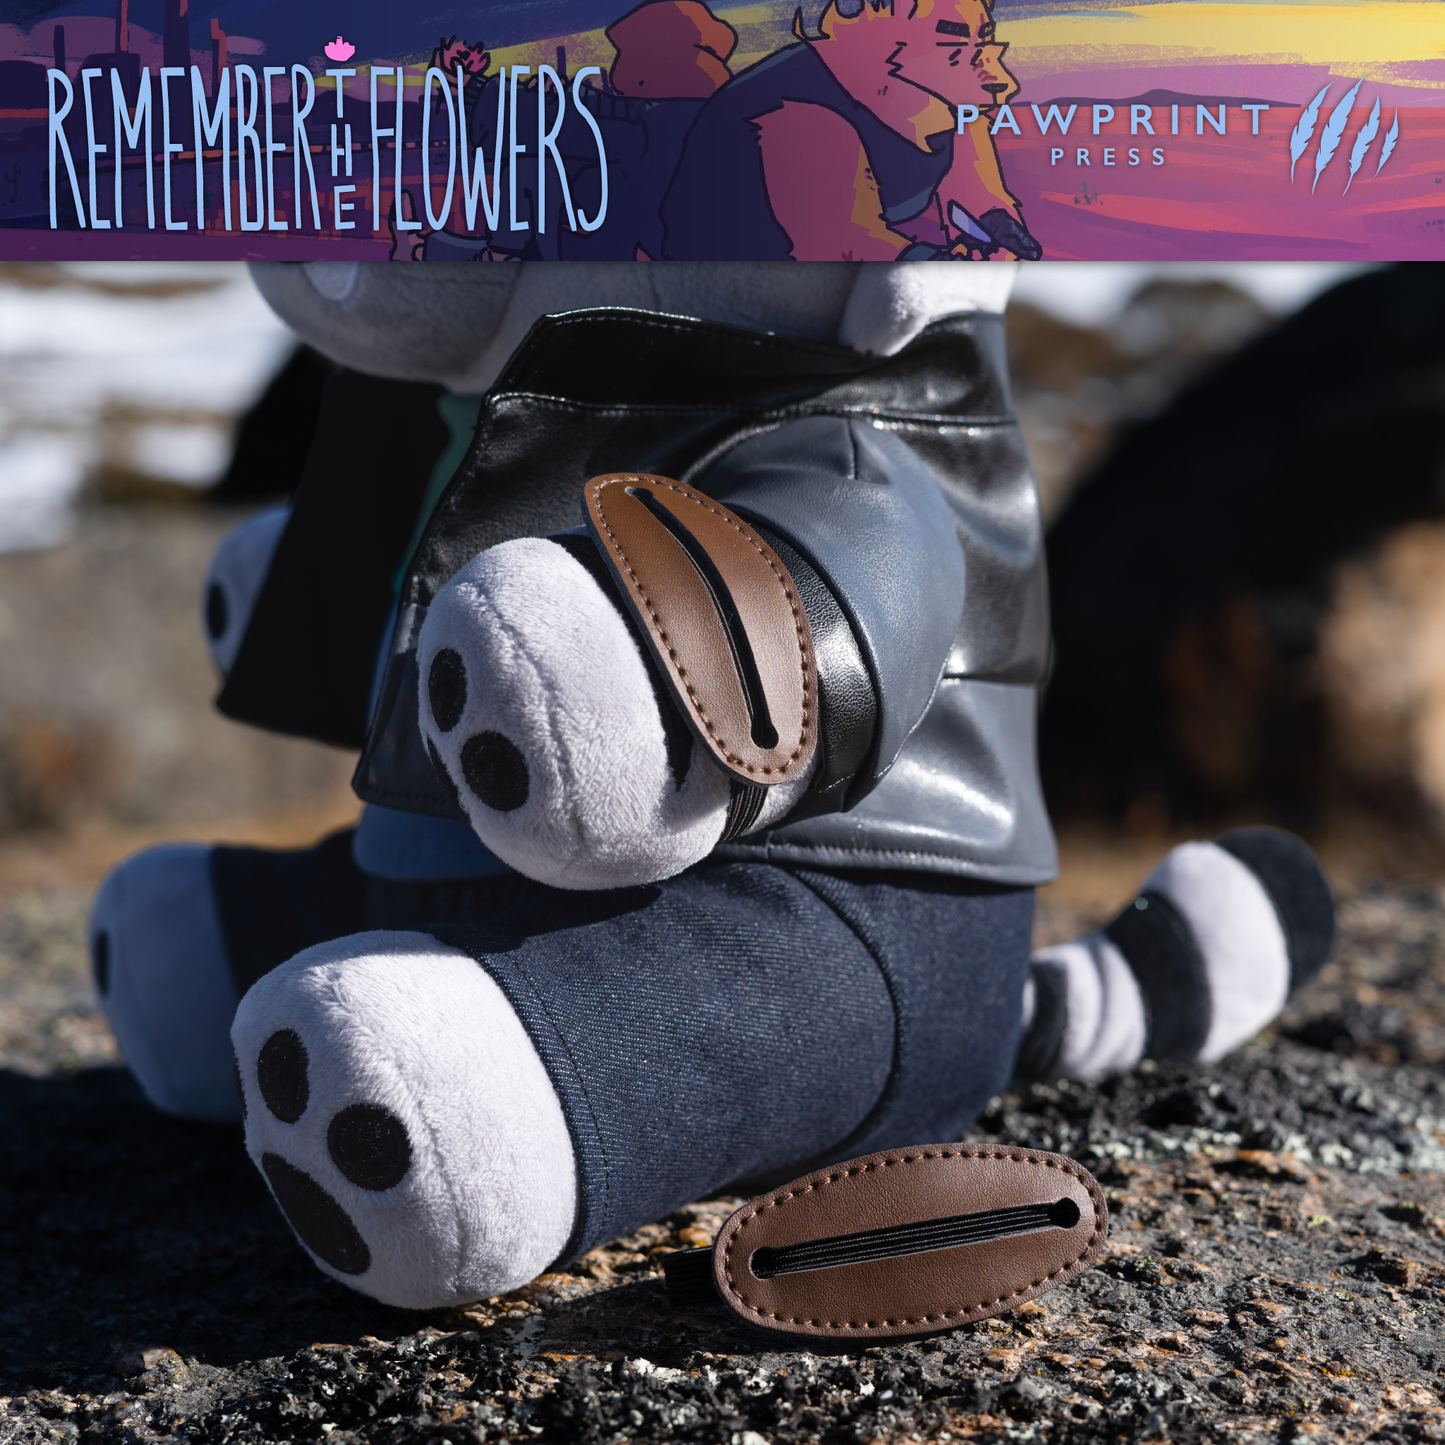 Remember the Flowers: Axel Plush